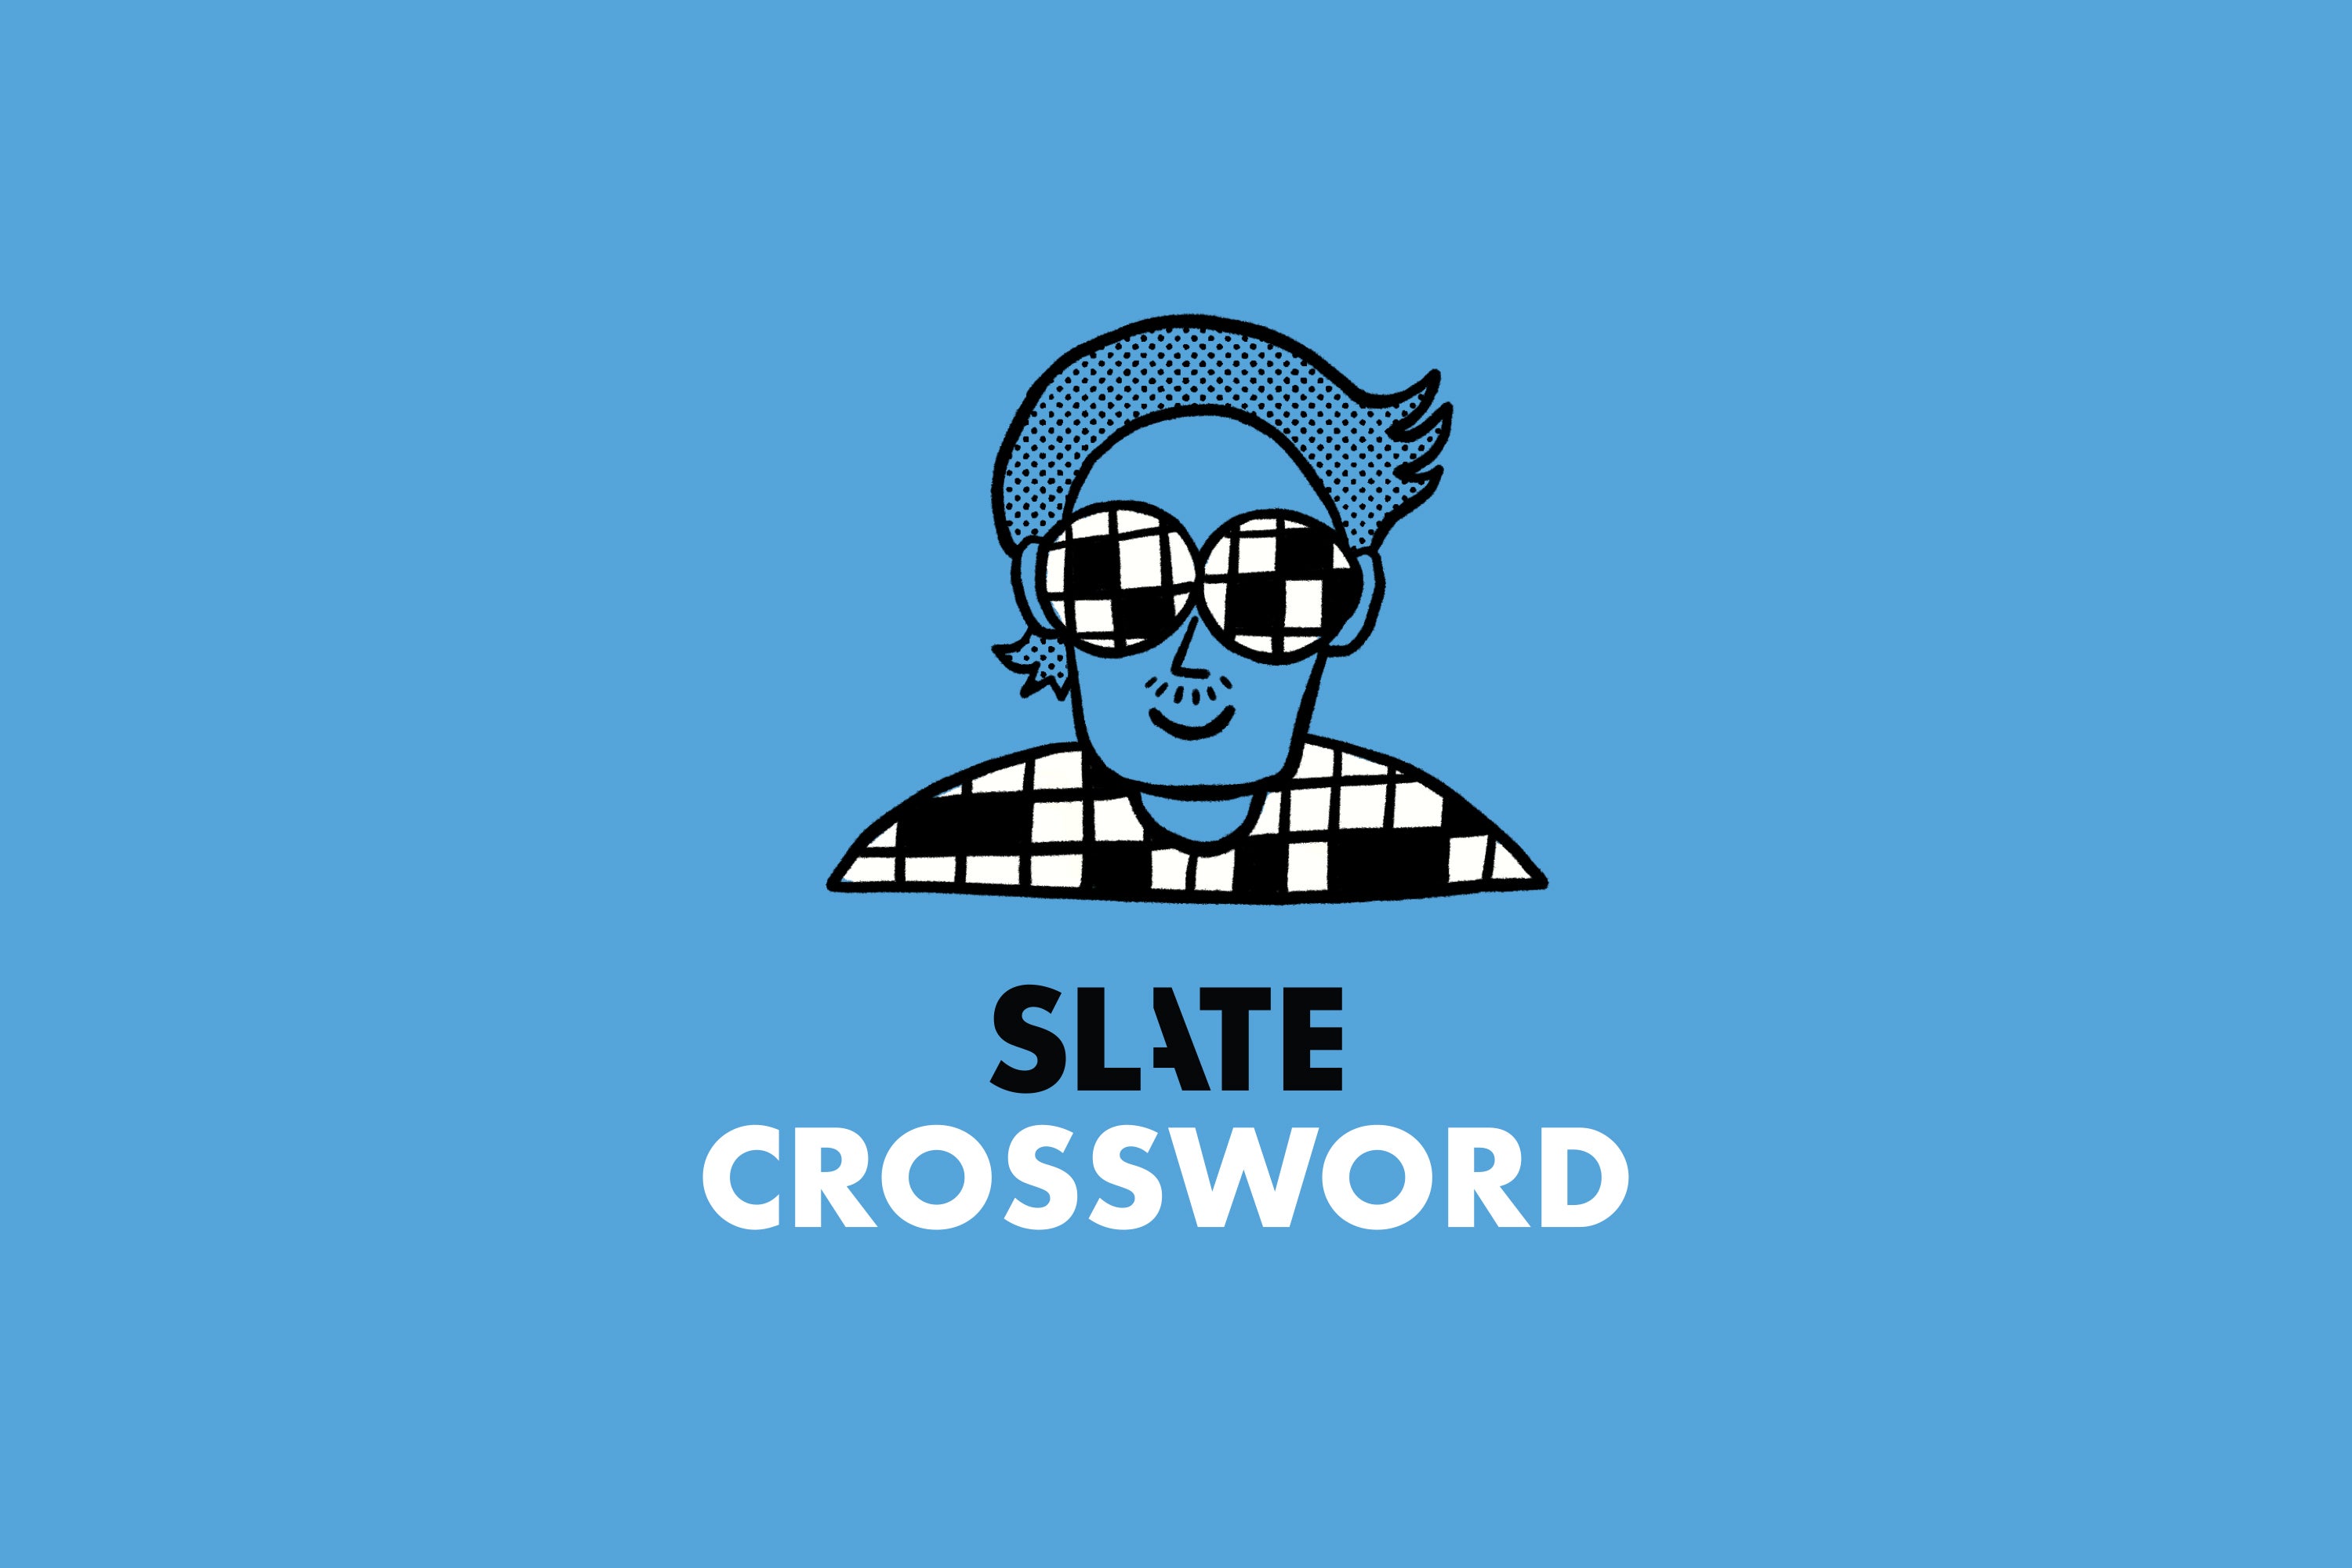 Slate Crossword: Namesake of a Razor You Can’t Shave With (Five Letters)